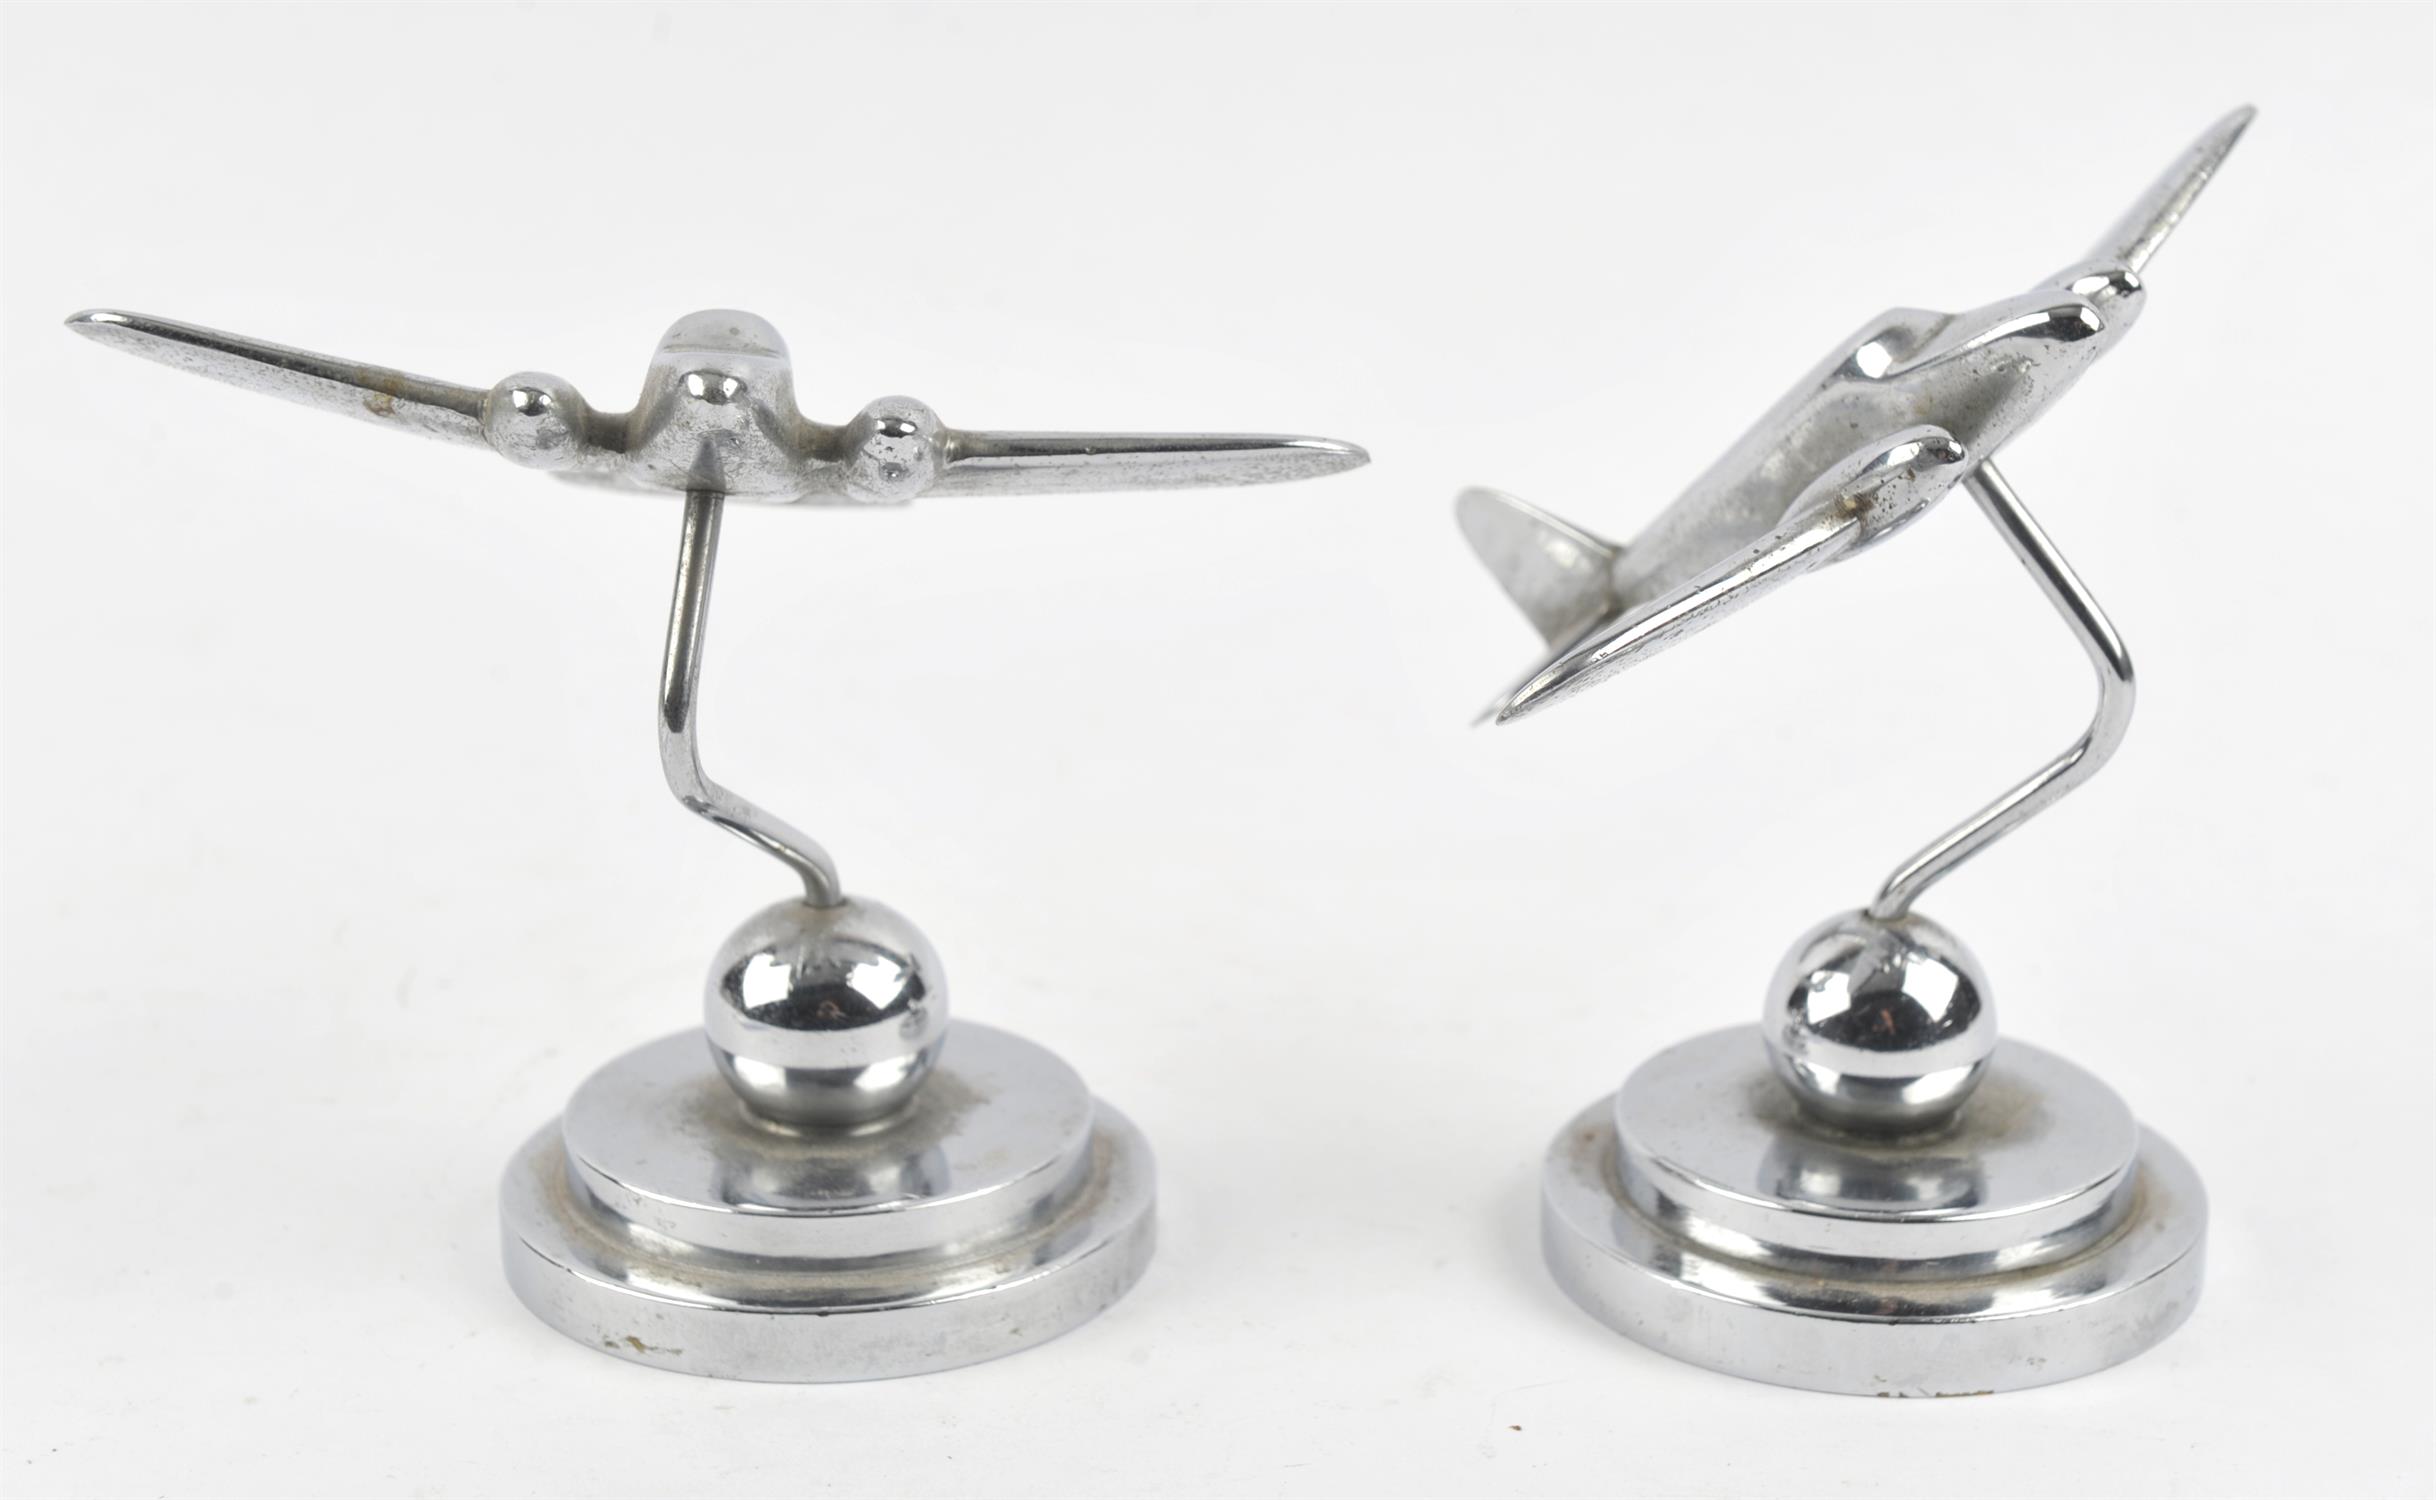 Pair of Art Deco aluminium desk ornaments cast as twin engine aircraft, on stepped base, - Image 2 of 2